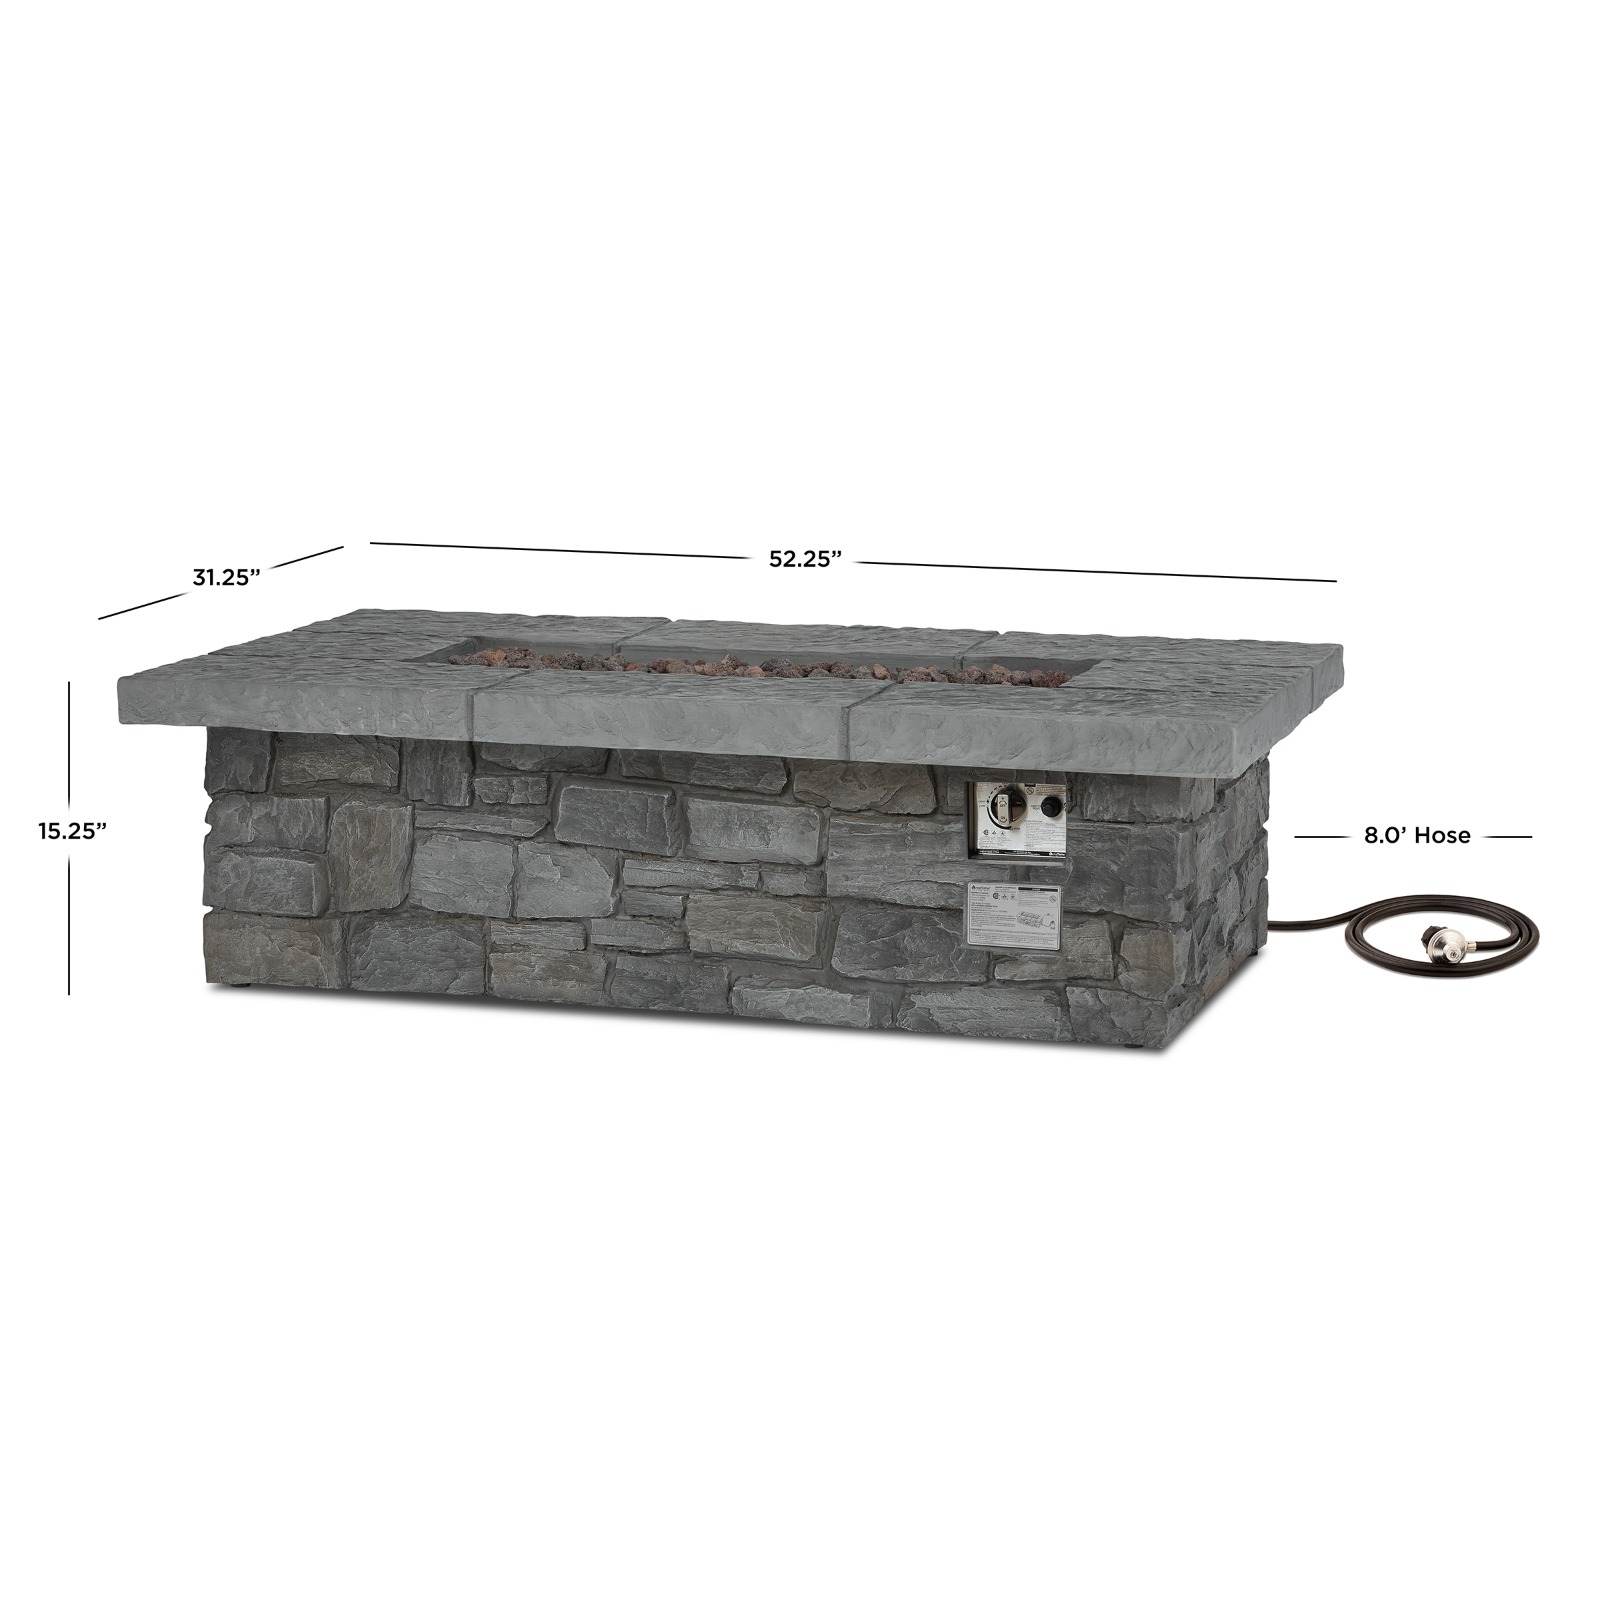 Sedona 52" Rectangle Propane Fire Pit Outdoor Fireplace Fire Table for Backyard or Patio Dimensions